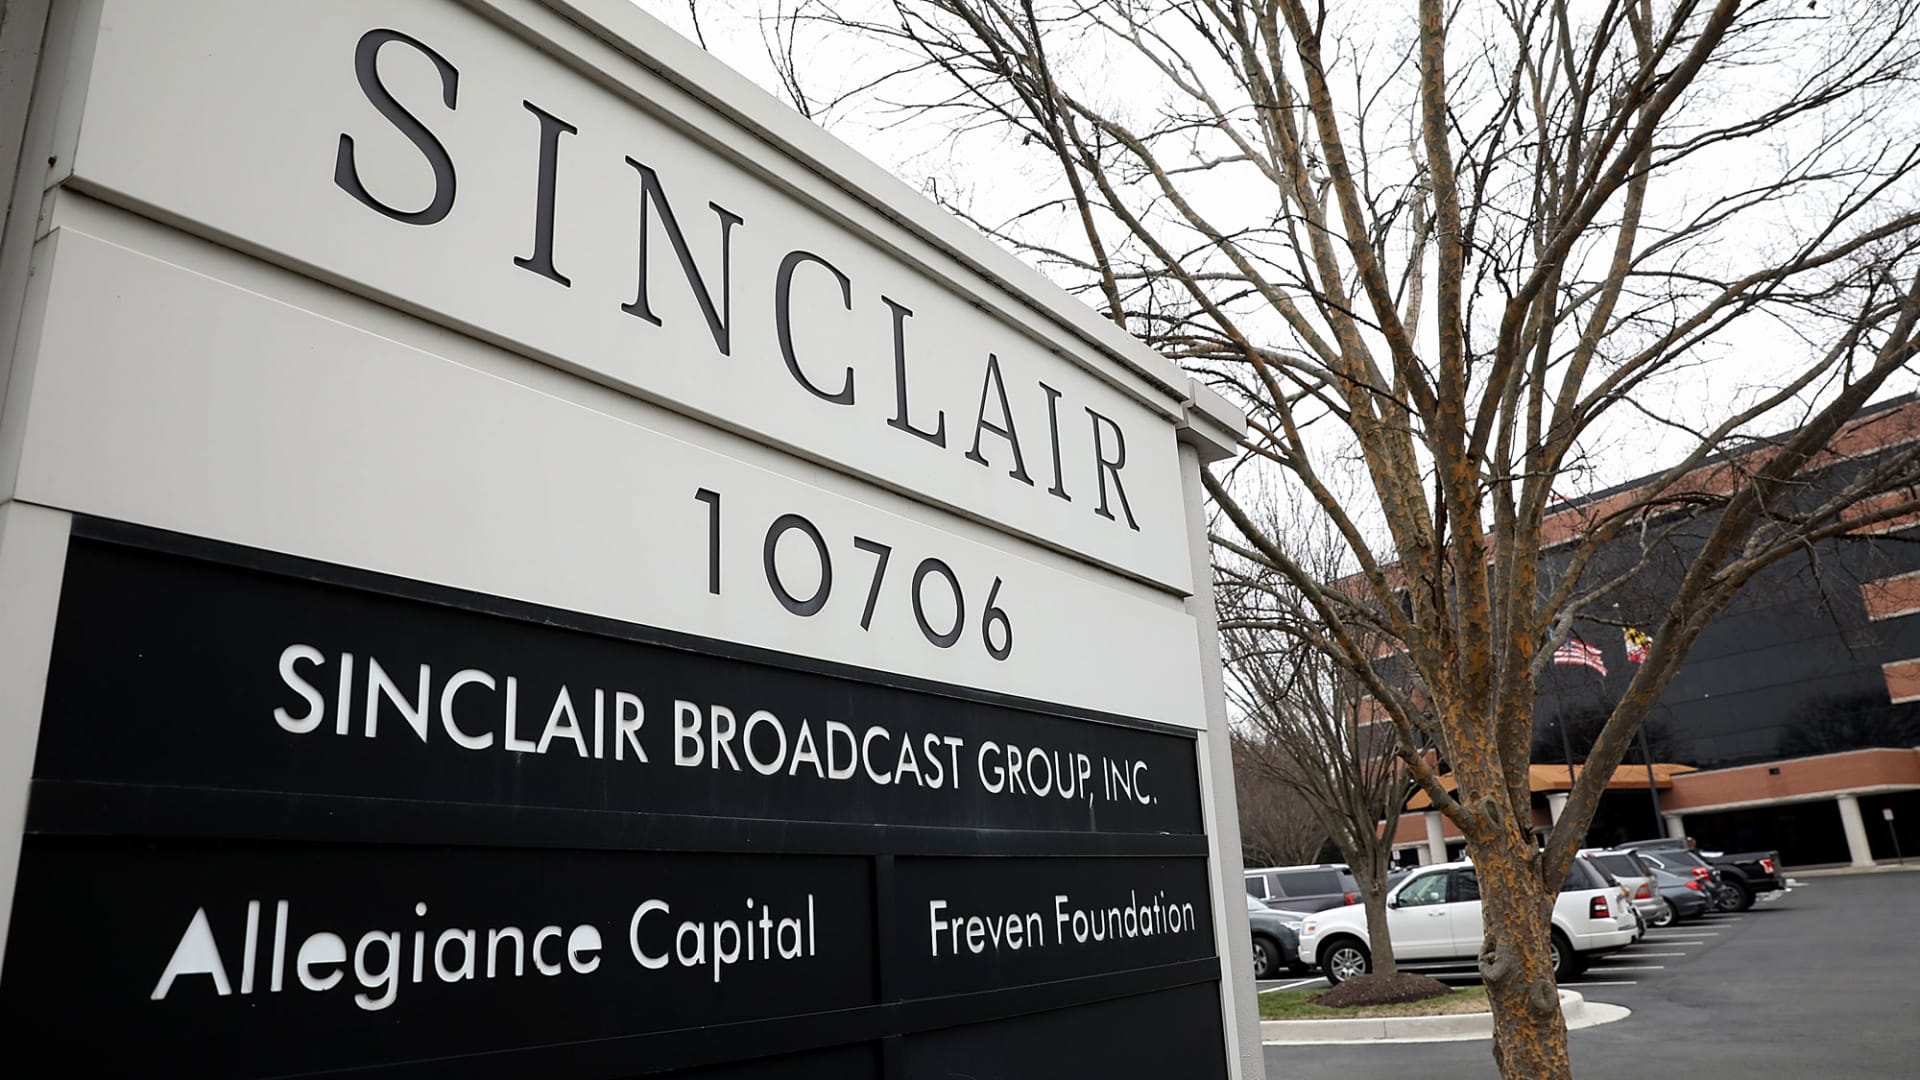 The headquarters of the Sinclair Broadcast Group in Hunt Valley, Maryland.